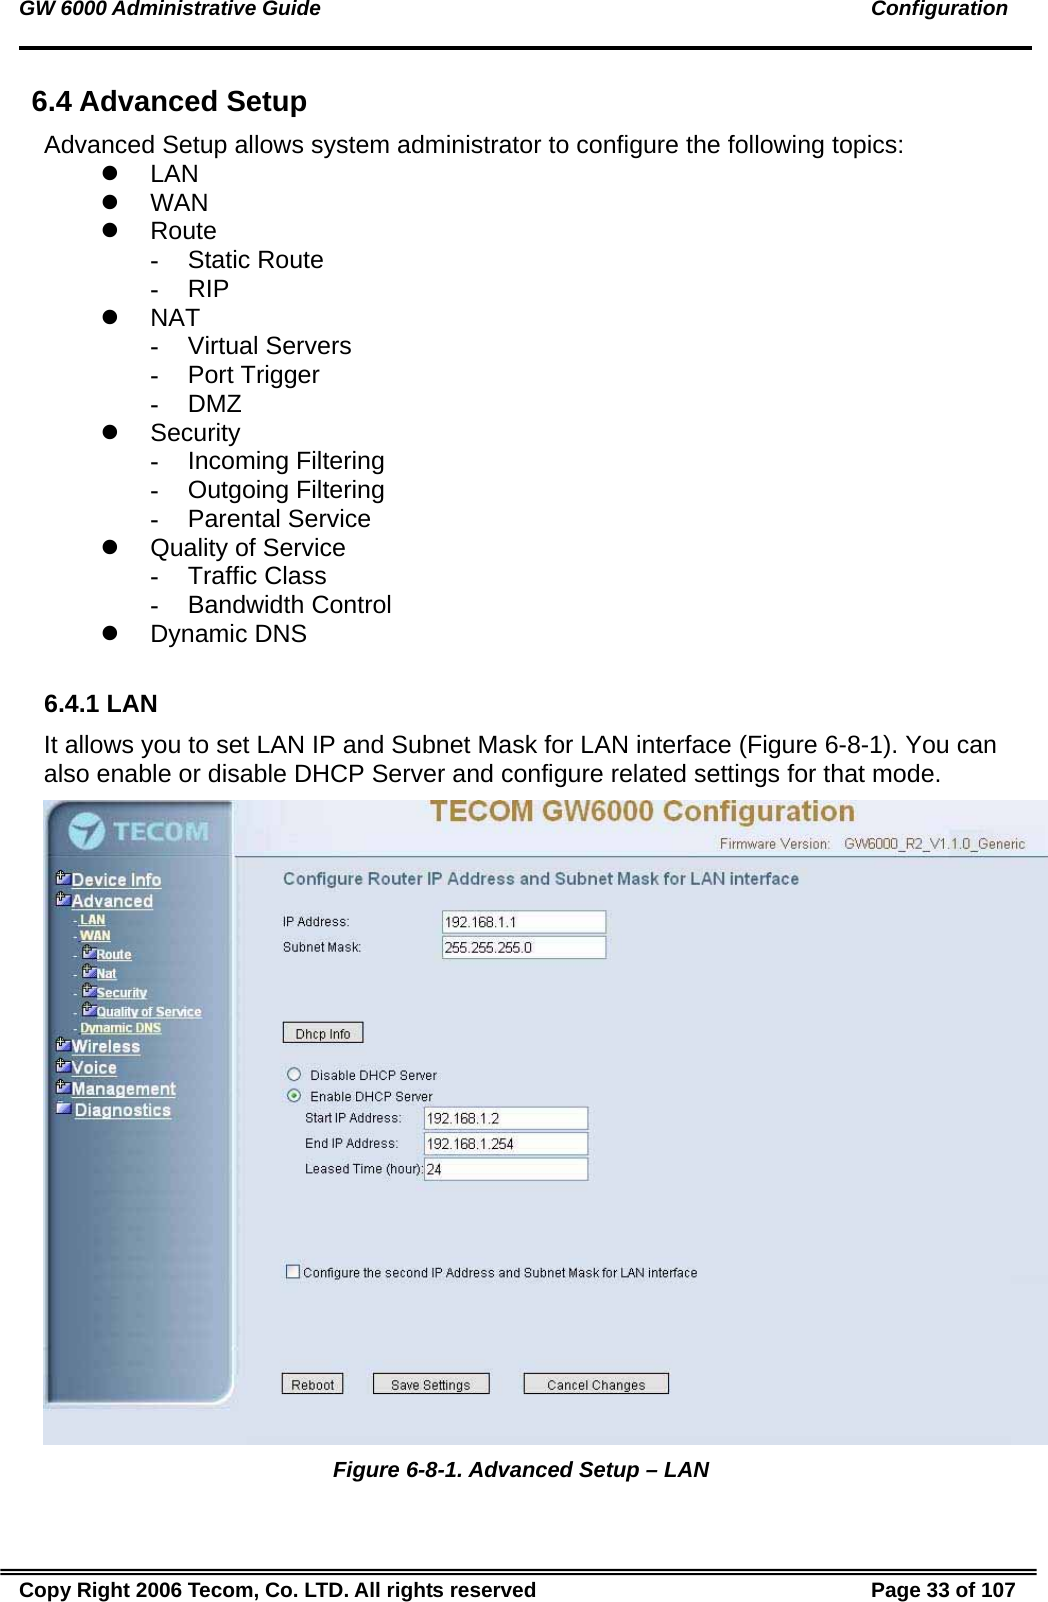 GW 6000 Administrative Guide                                                                                               Configuration 6.4 Advanced Setup Advanced Setup allows system administrator to configure the following topics: z LAN z WAN z Route - Static Route - RIP z NAT - Virtual Servers - Port Trigger - DMZ z Security - Incoming Filtering - Outgoing Filtering - Parental Service z  Quality of Service  - Traffic Class - Bandwidth Control z Dynamic DNS  6.4.1 LAN It allows you to set LAN IP and Subnet Mask for LAN interface (Figure 6-8-1). You can also enable or disable DHCP Server and configure related settings for that mode.   Figure 6-8-1. Advanced Setup – LAN Copy Right 2006 Tecom, Co. LTD. All rights reserved  Page 33 of 107 